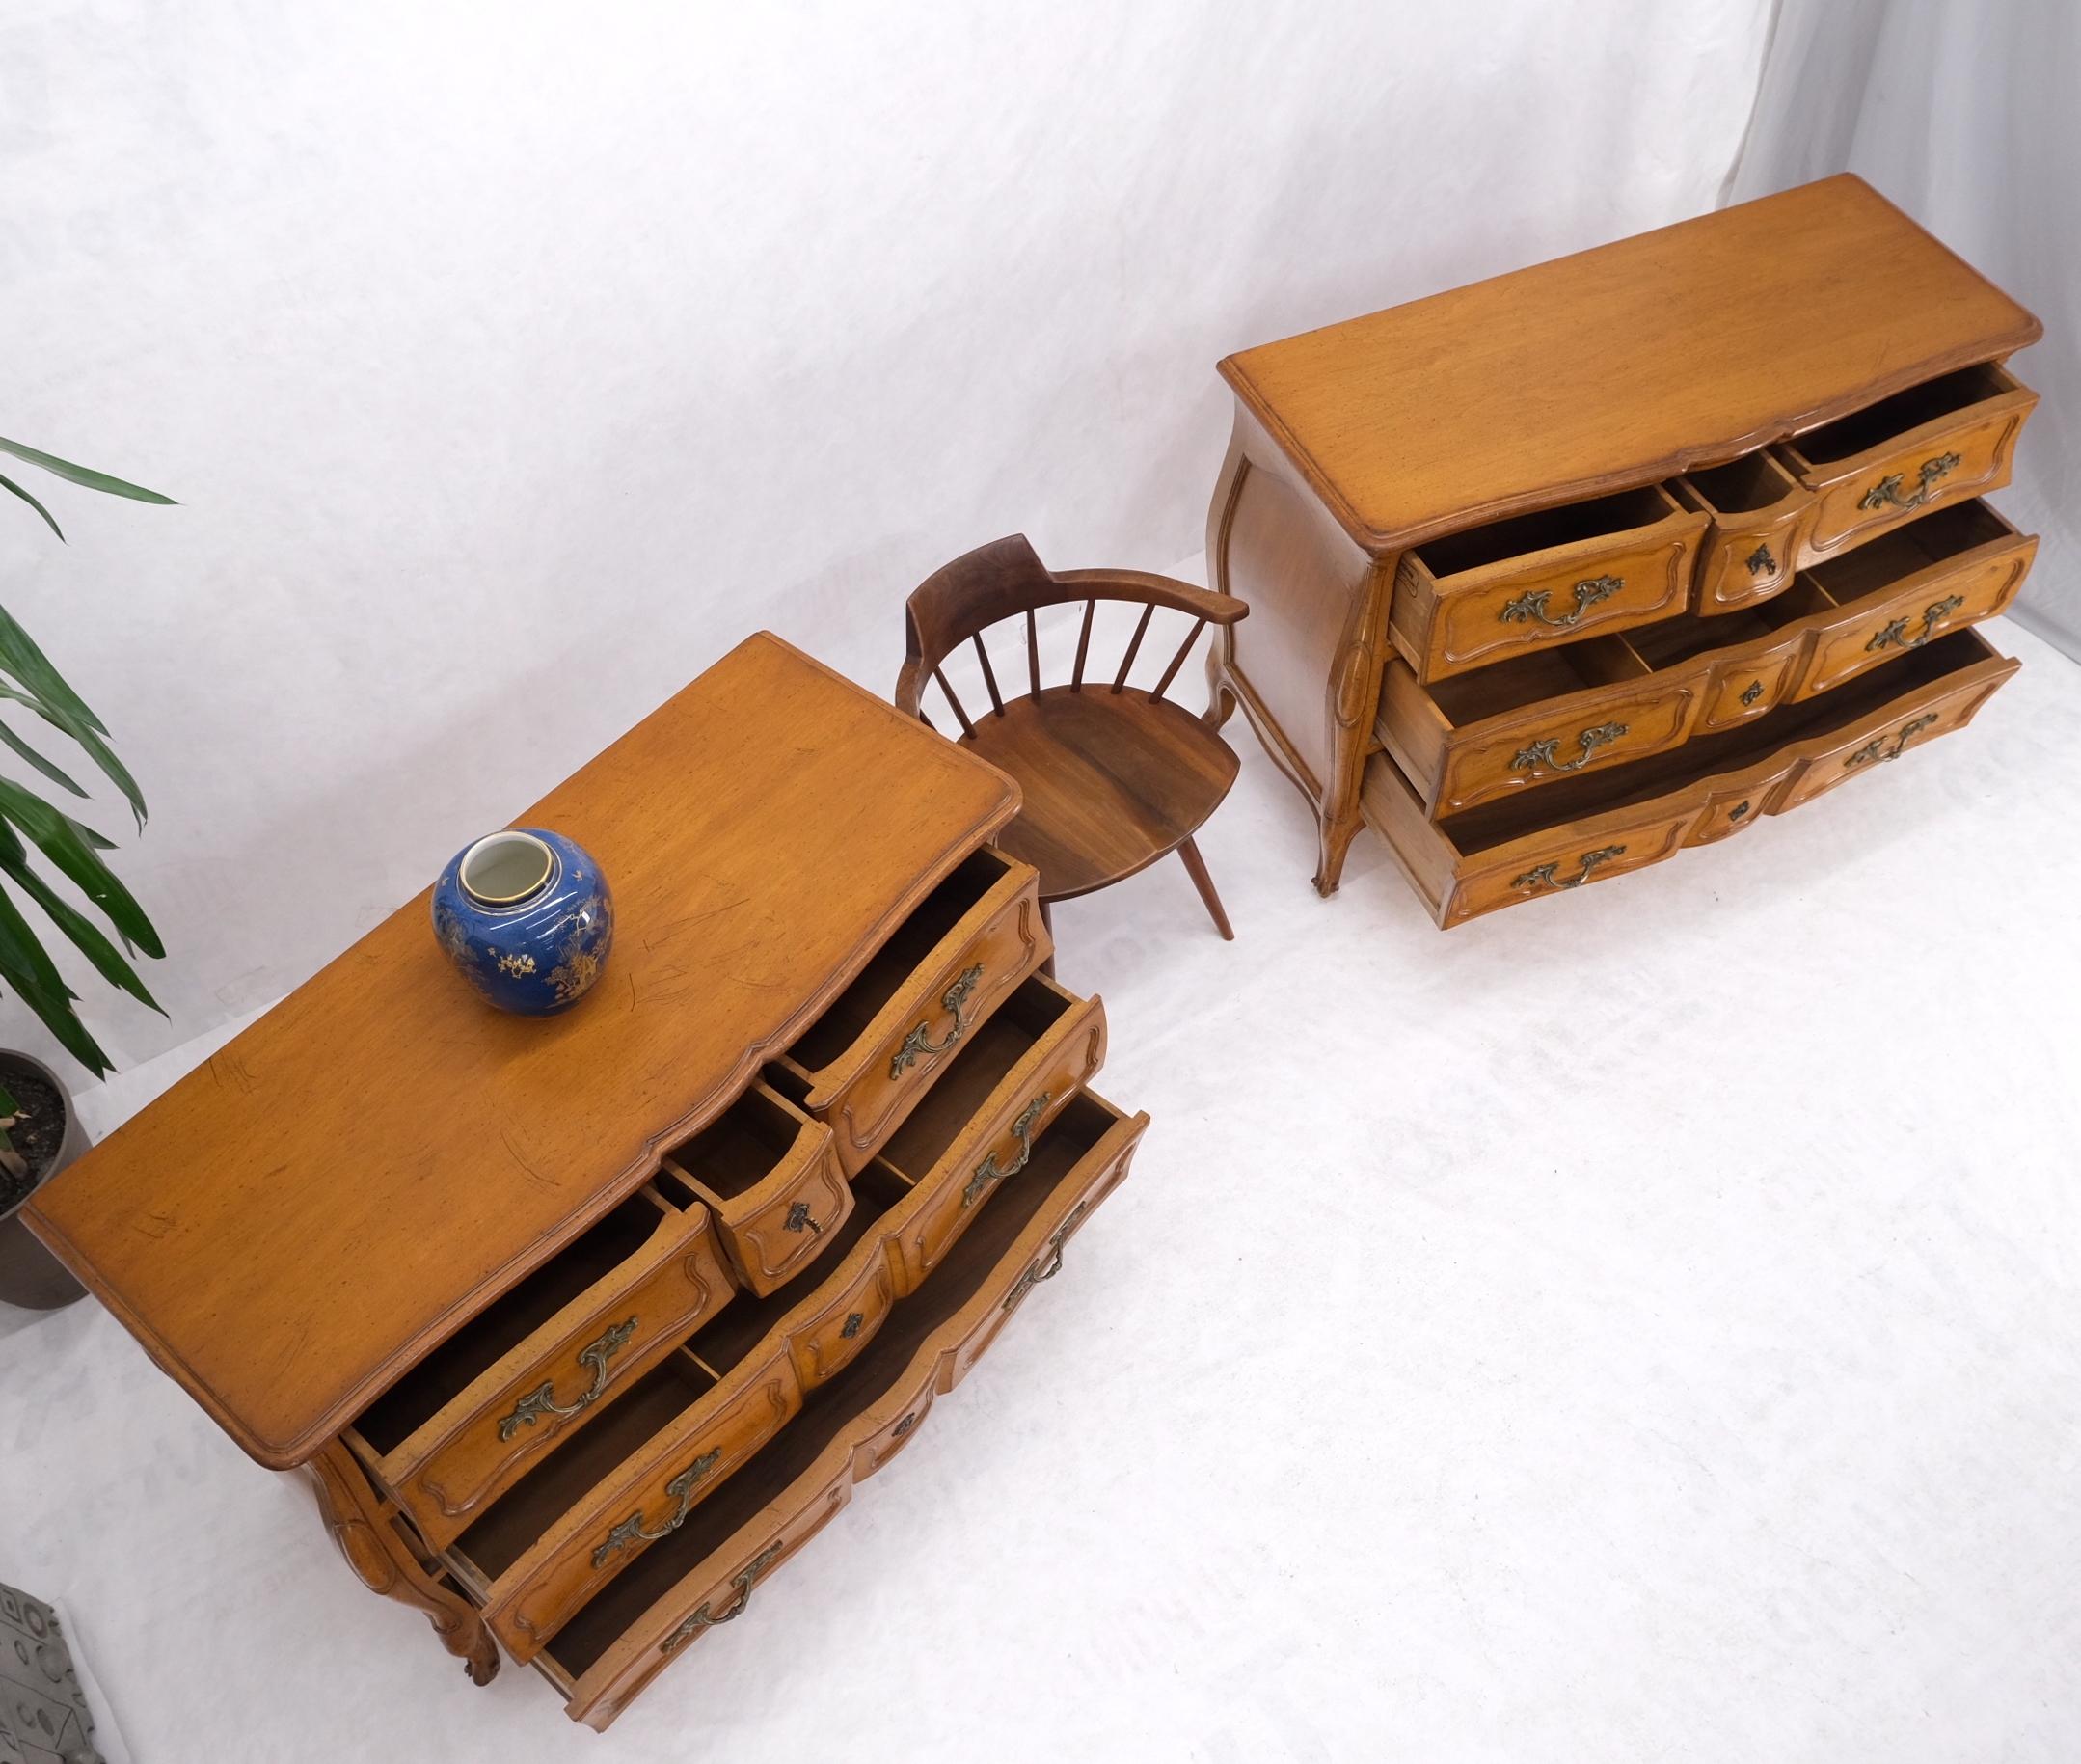 Pair Country French Bombay Shape Three Drawers Dressers Commodes Chests 3 Drawer For Sale 10